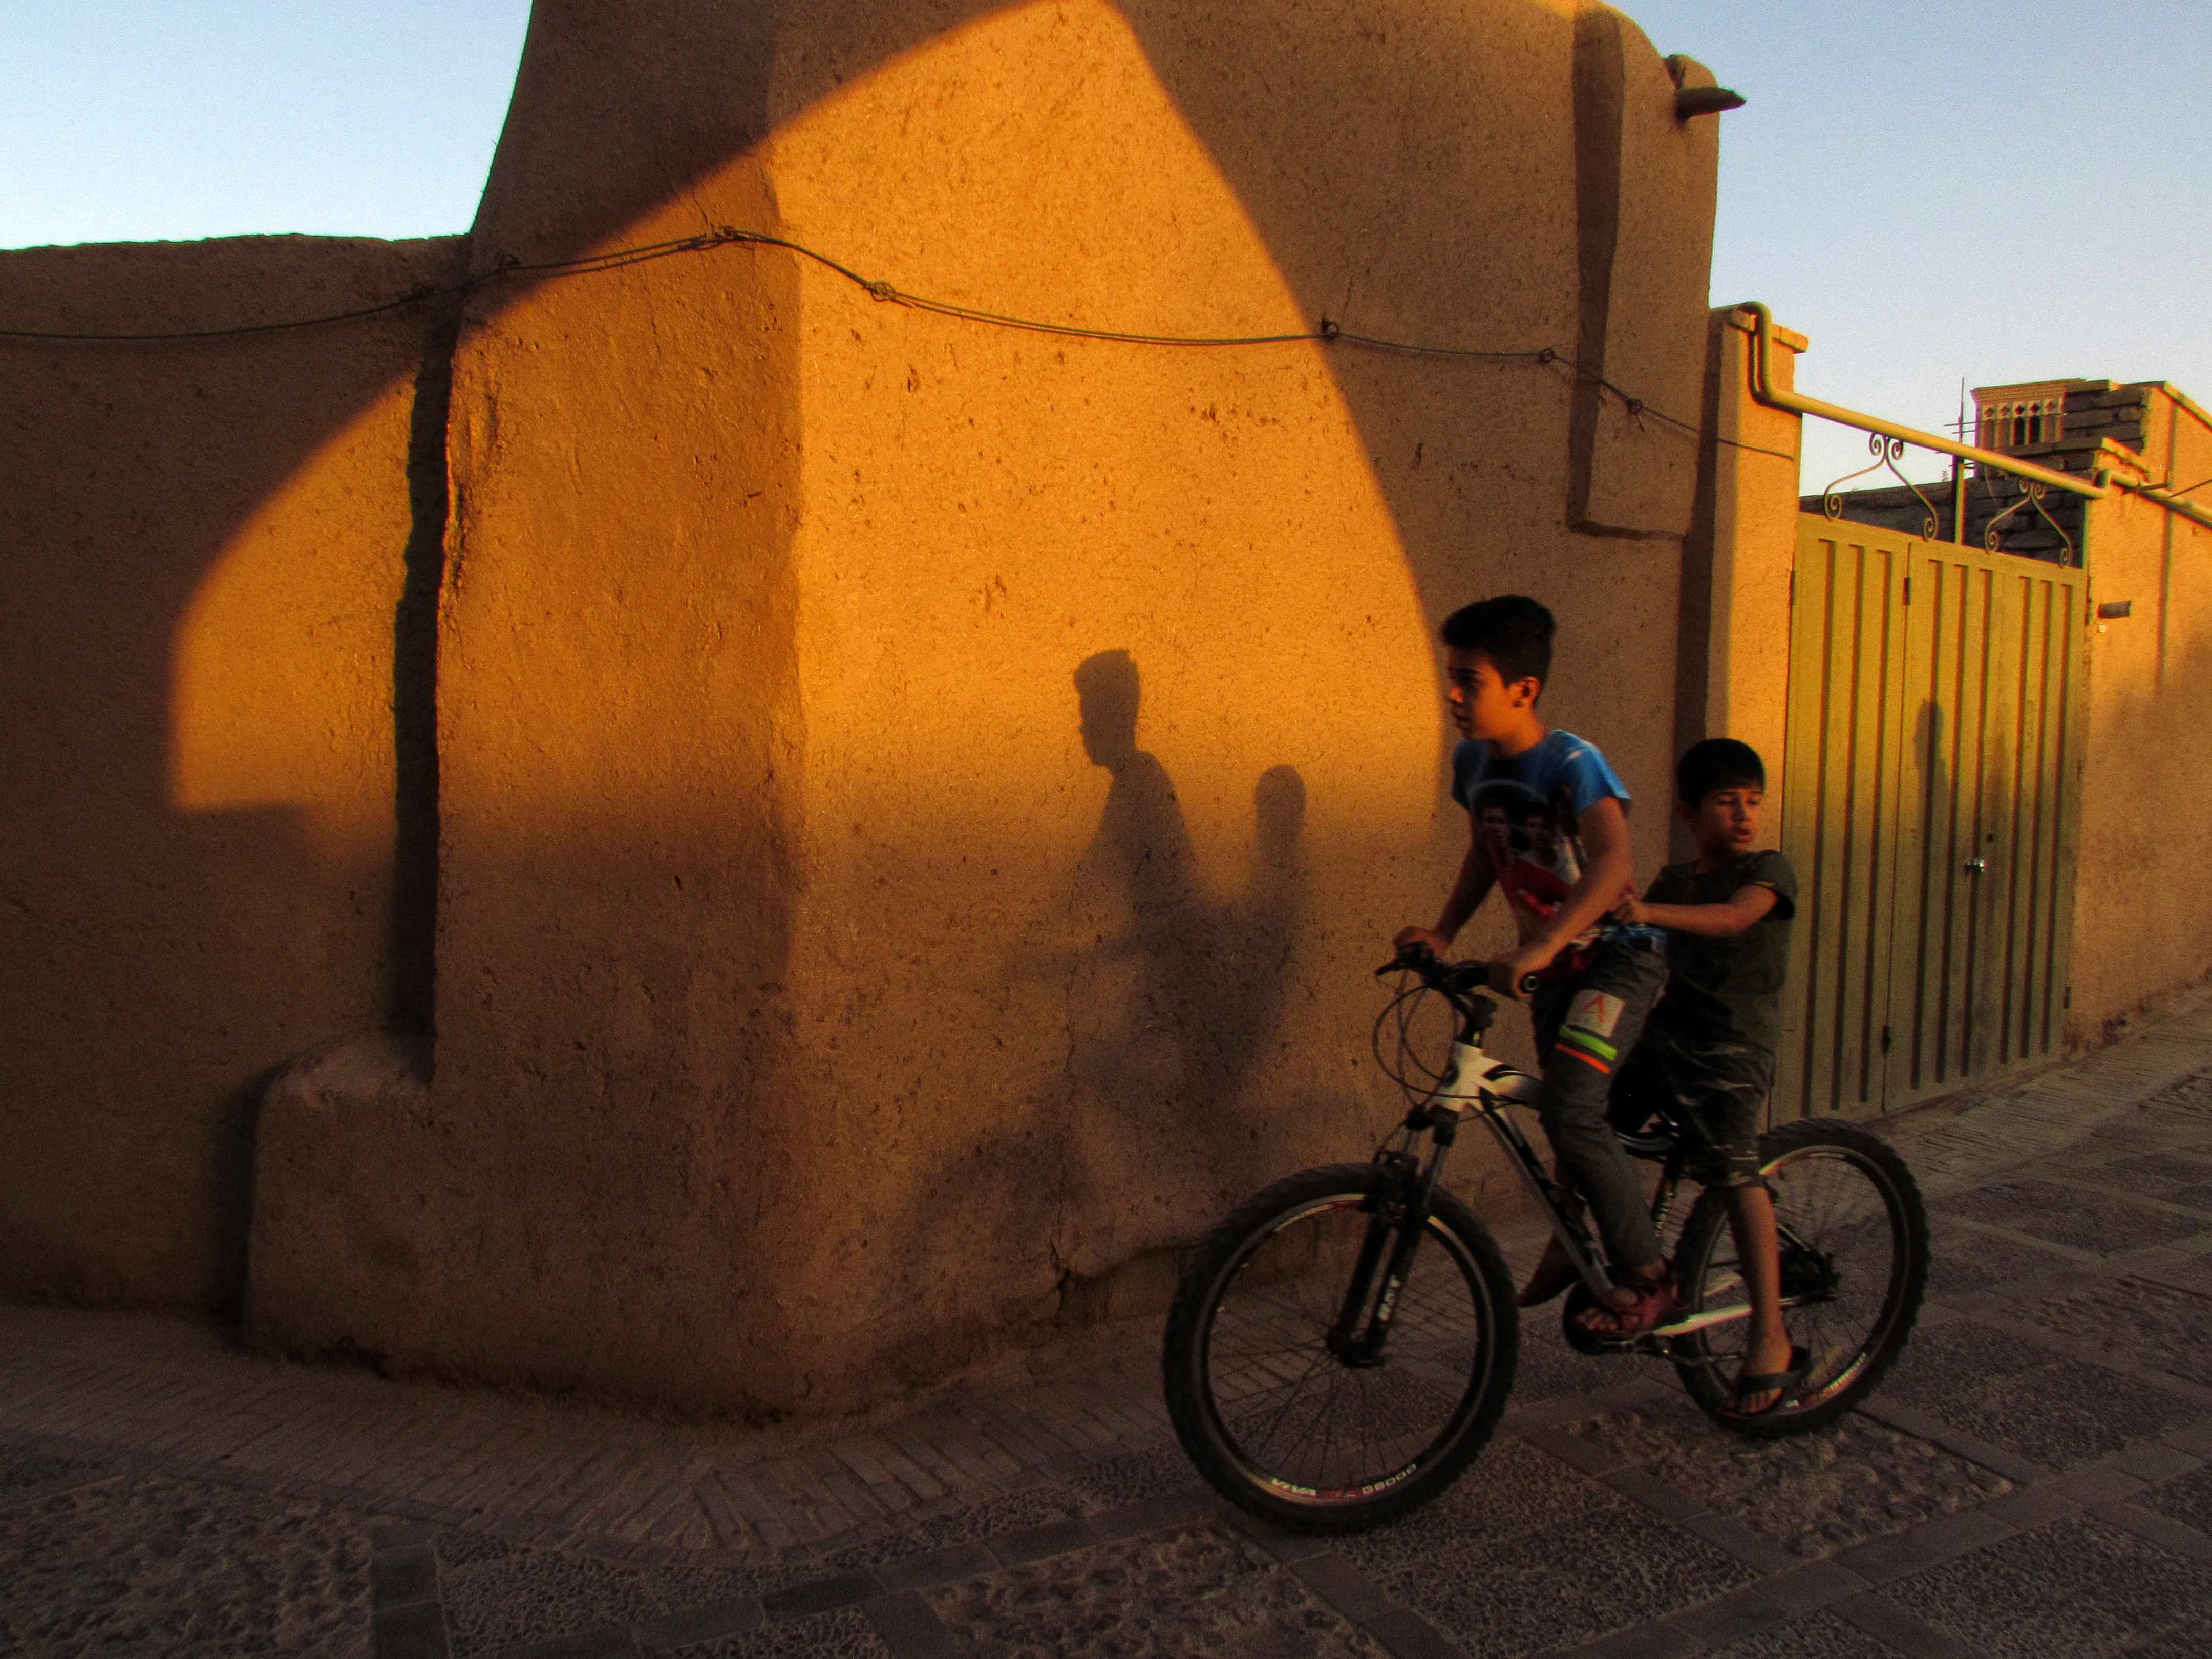 People of old part of Yazd city, Iran, with old houses and structures.